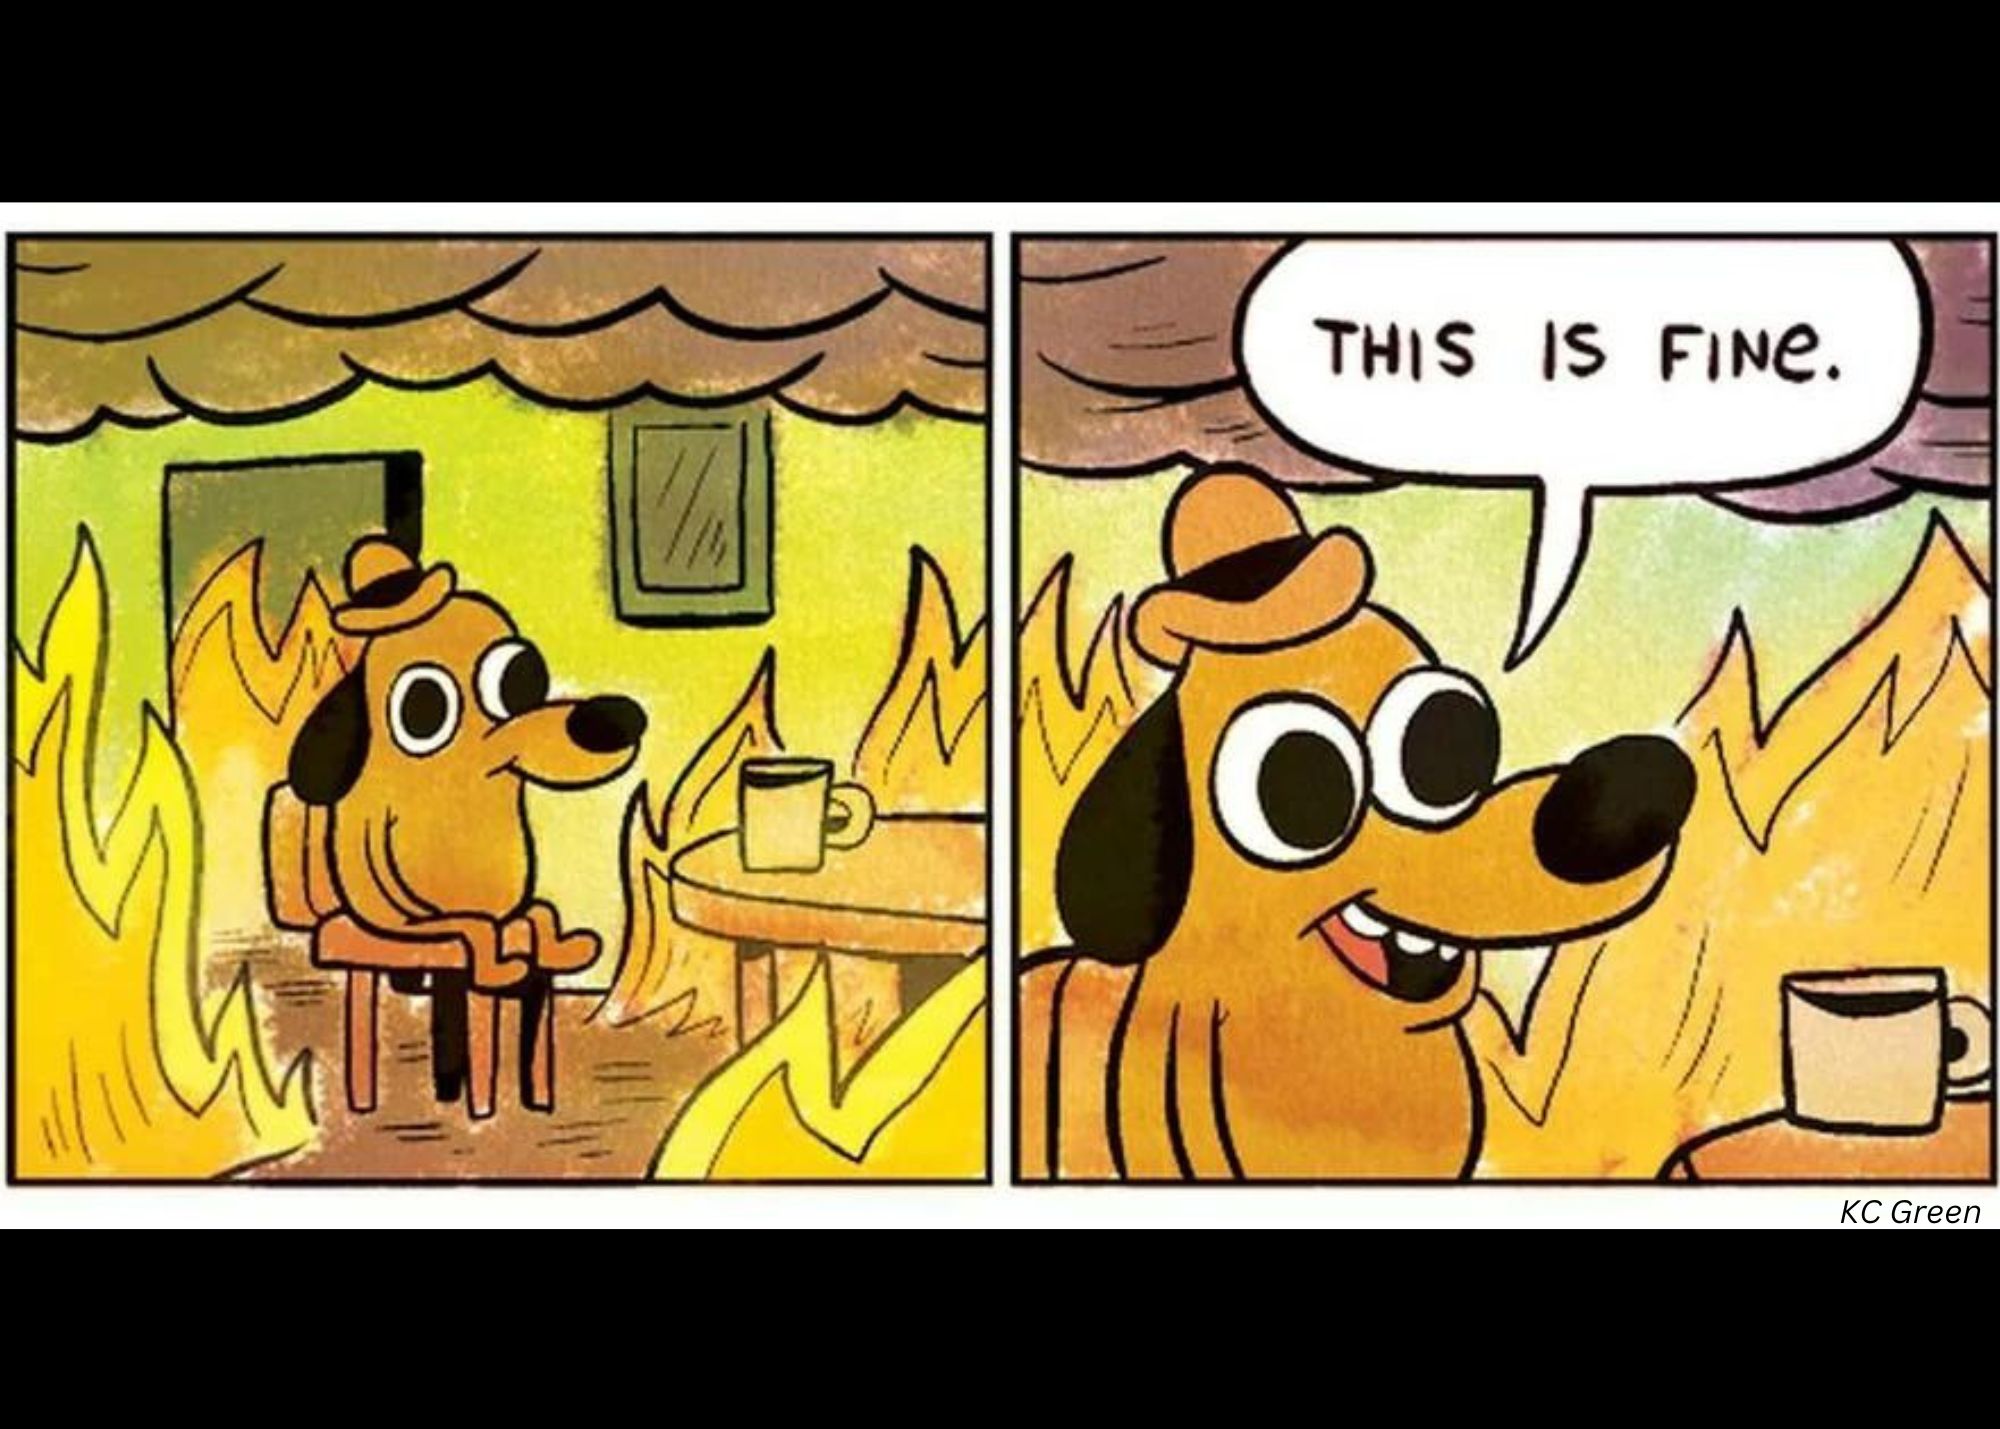 "This is Fine" meme by KC Green.